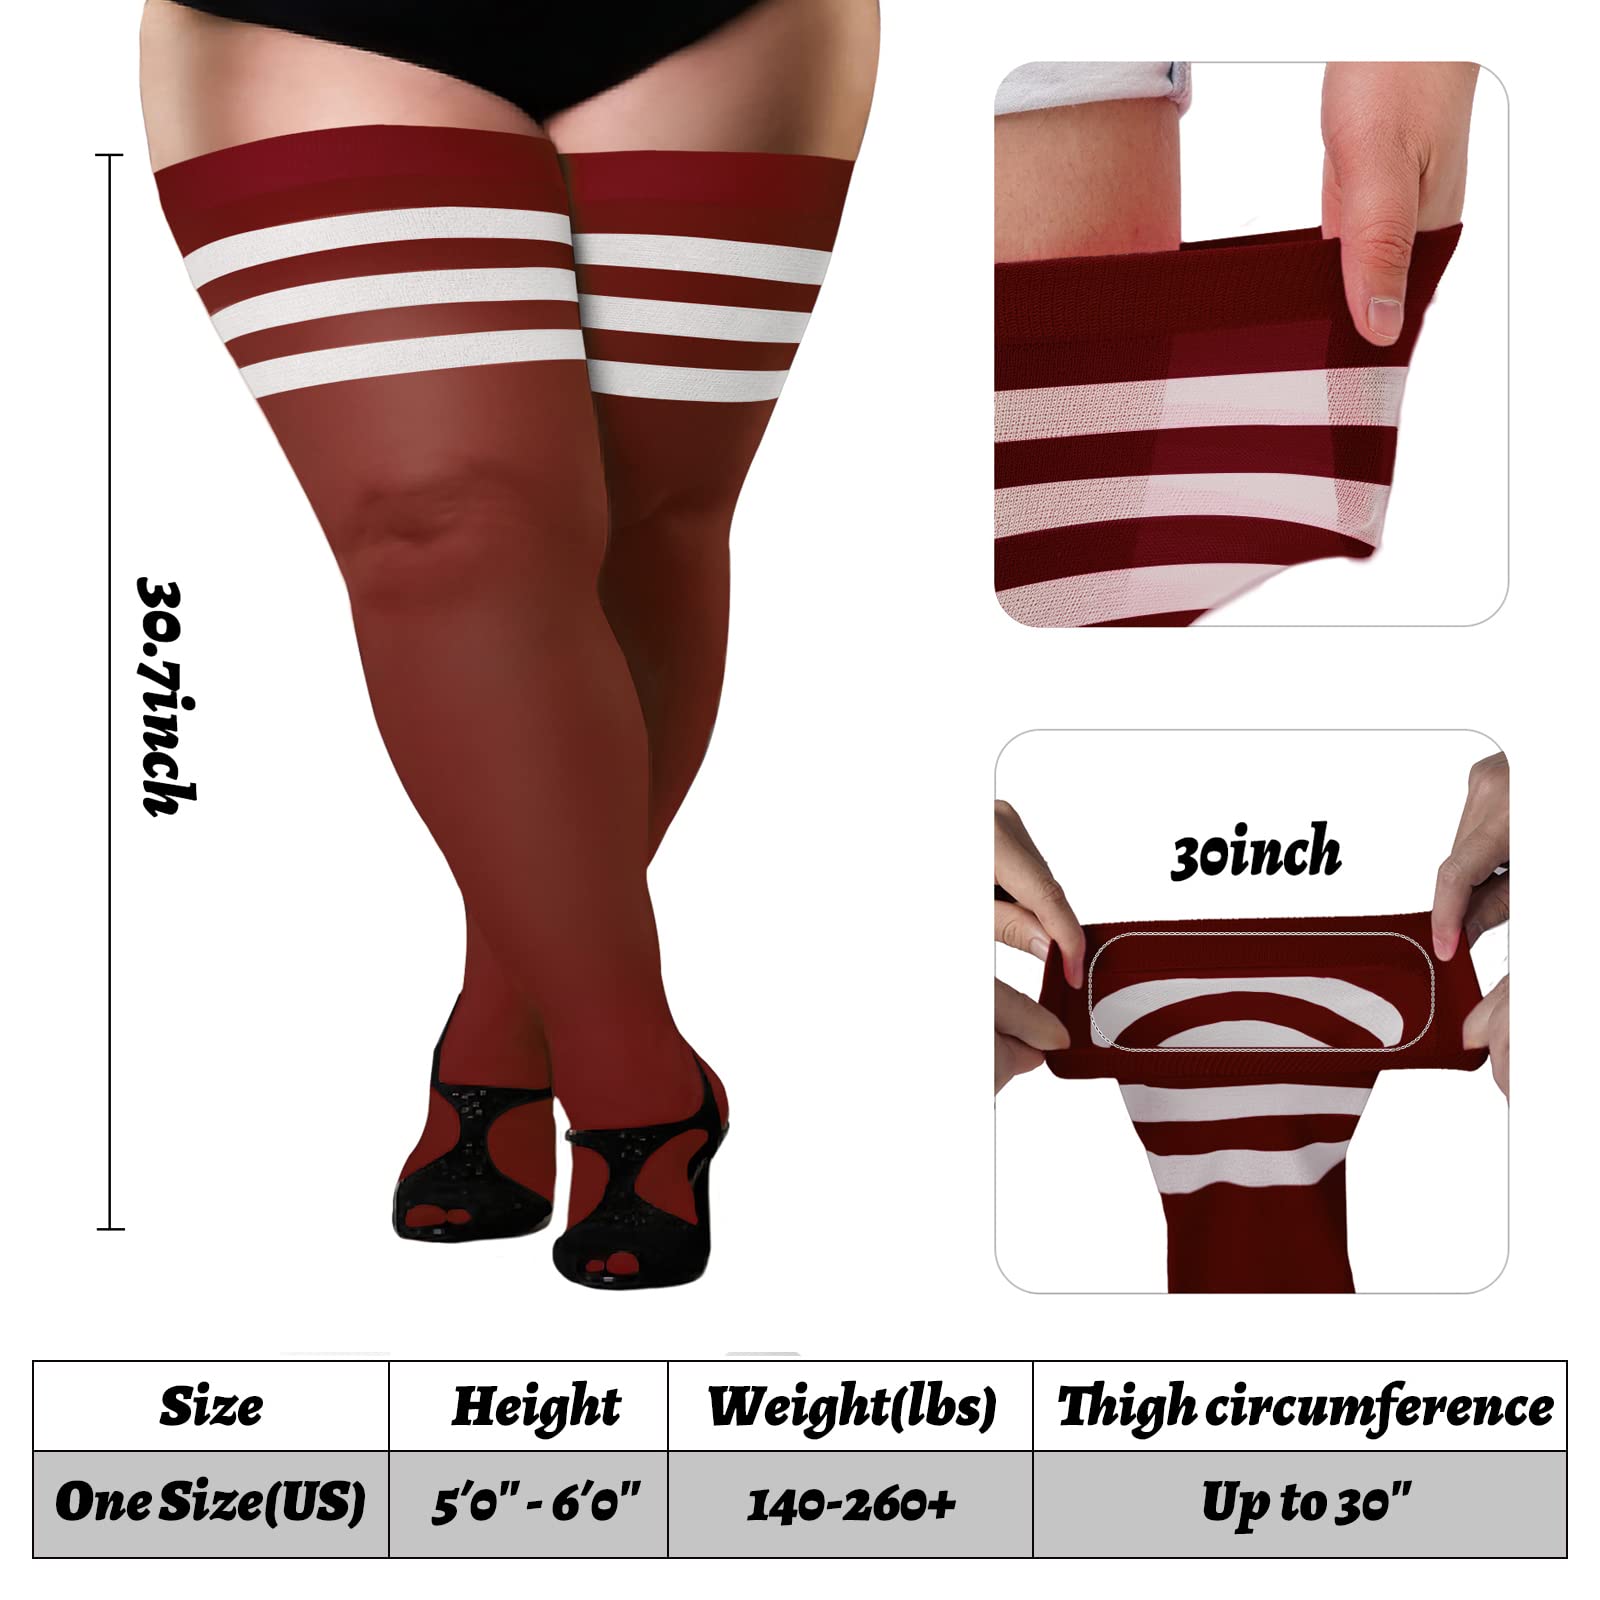 Red and White Striped Opaque Hold Ups